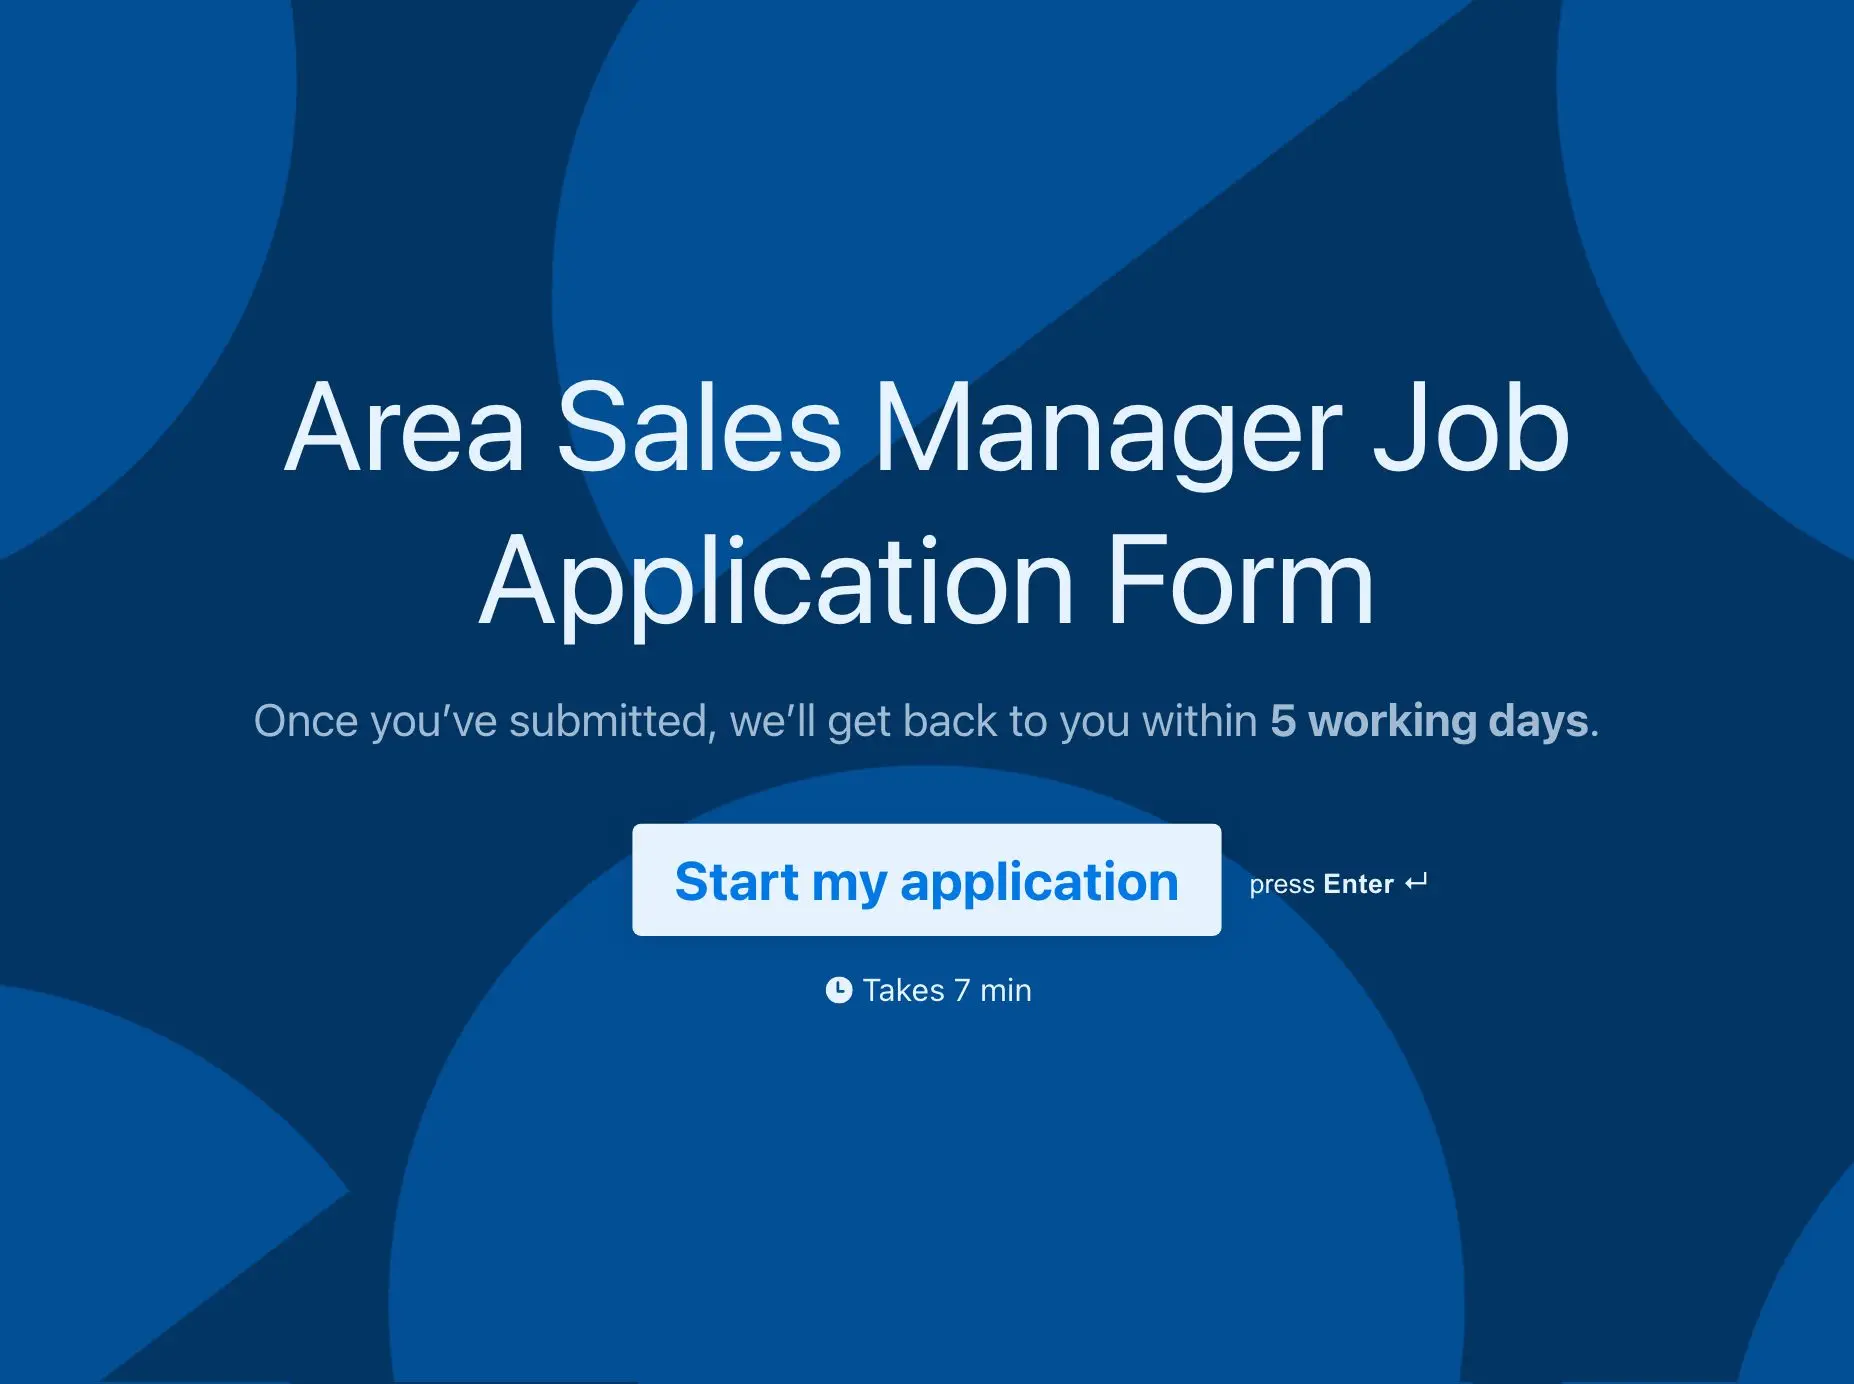 Area Sales Manager Job Application Form Template Hero